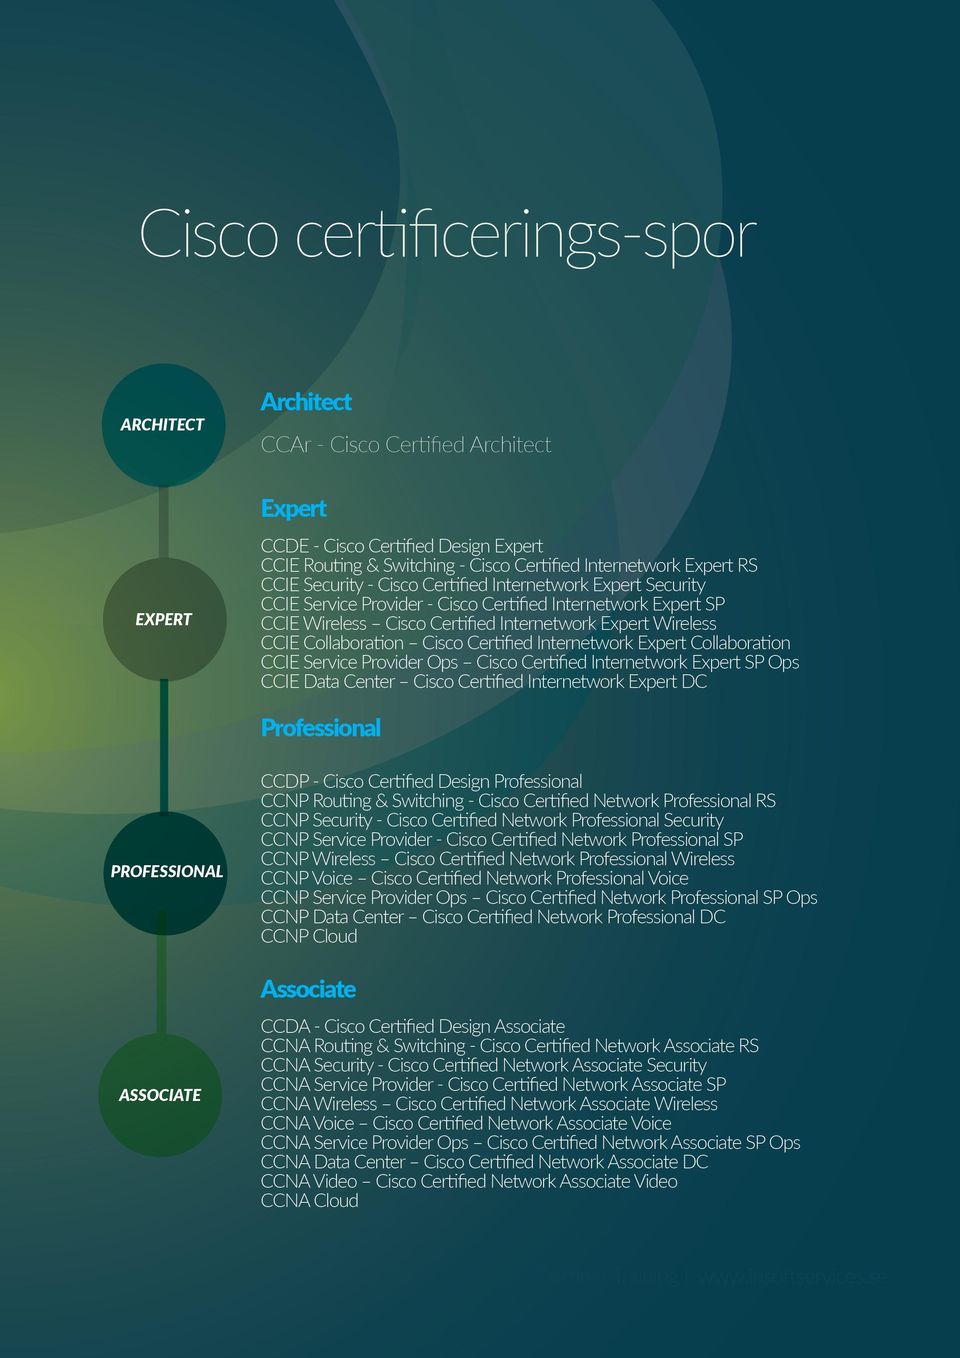 Collaboration Cisco Certified Internetwork Expert Collaboration CCIE Service Provider Ops Cisco Certified Internetwork Expert SP Ops CCIE Data Center Cisco Certified Internetwork Expert DC